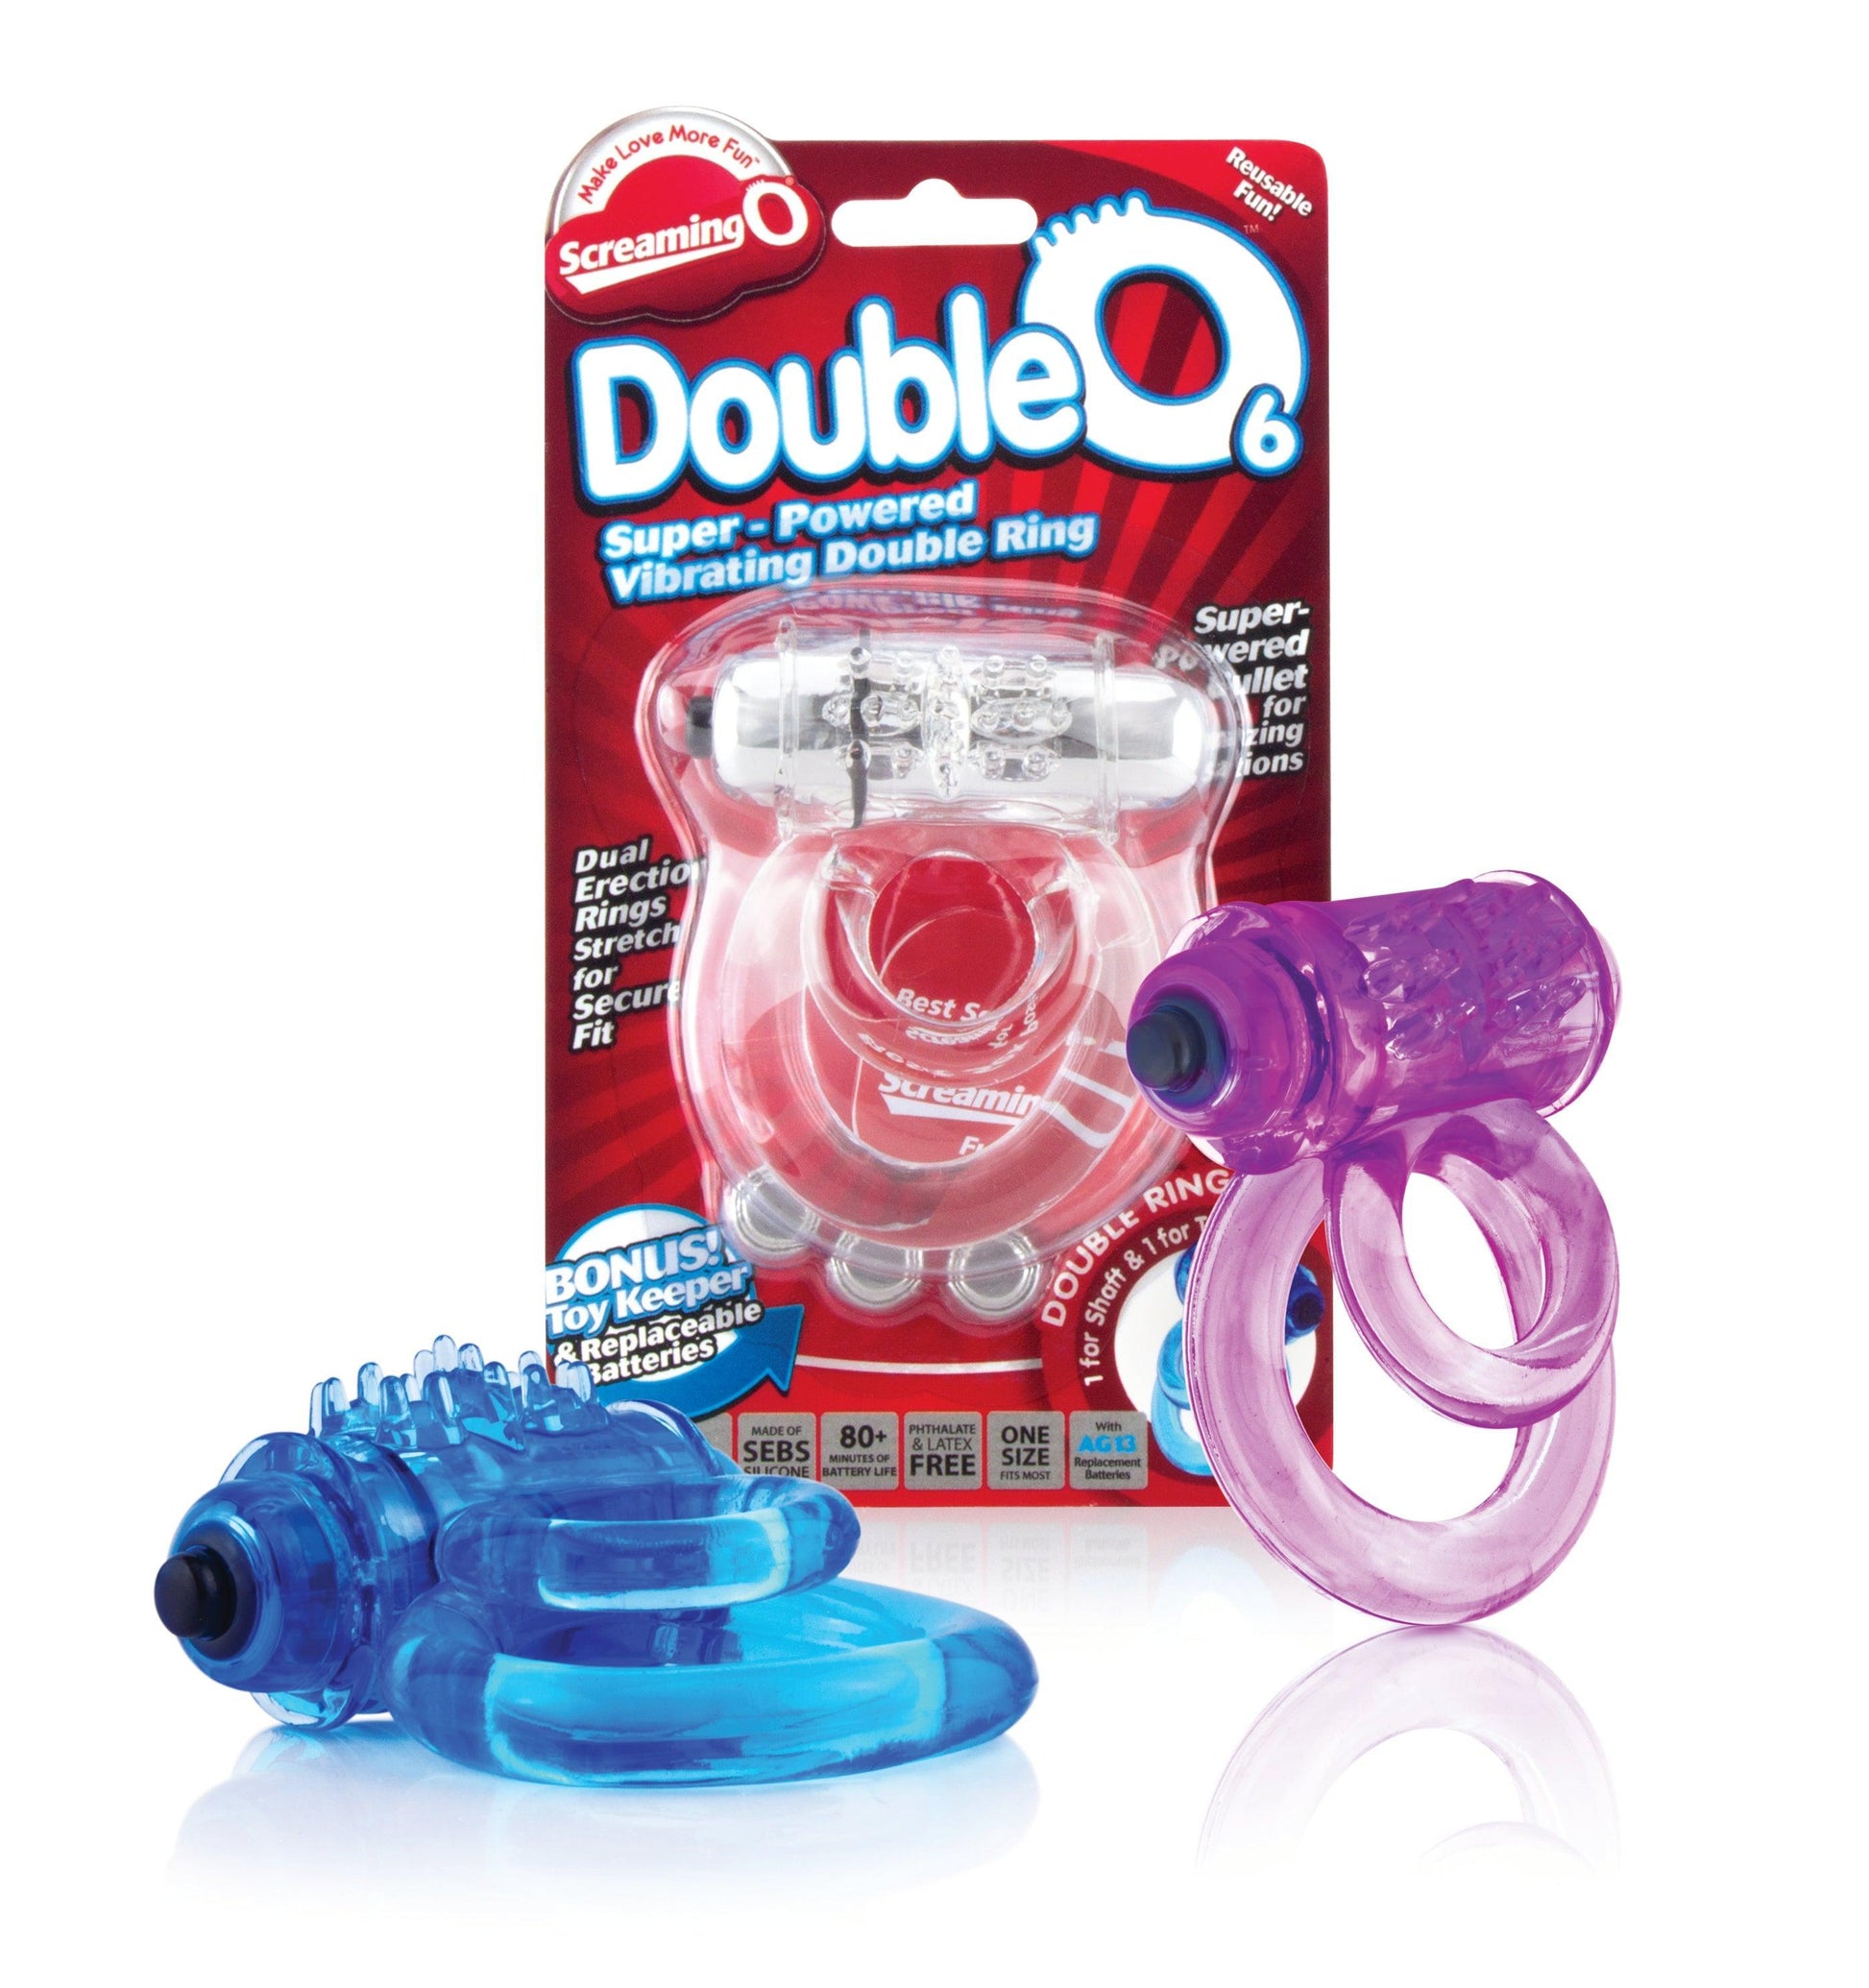 Doubleo 6 - 6 Count Box - Assorted Colors - My Sex Toy Hub